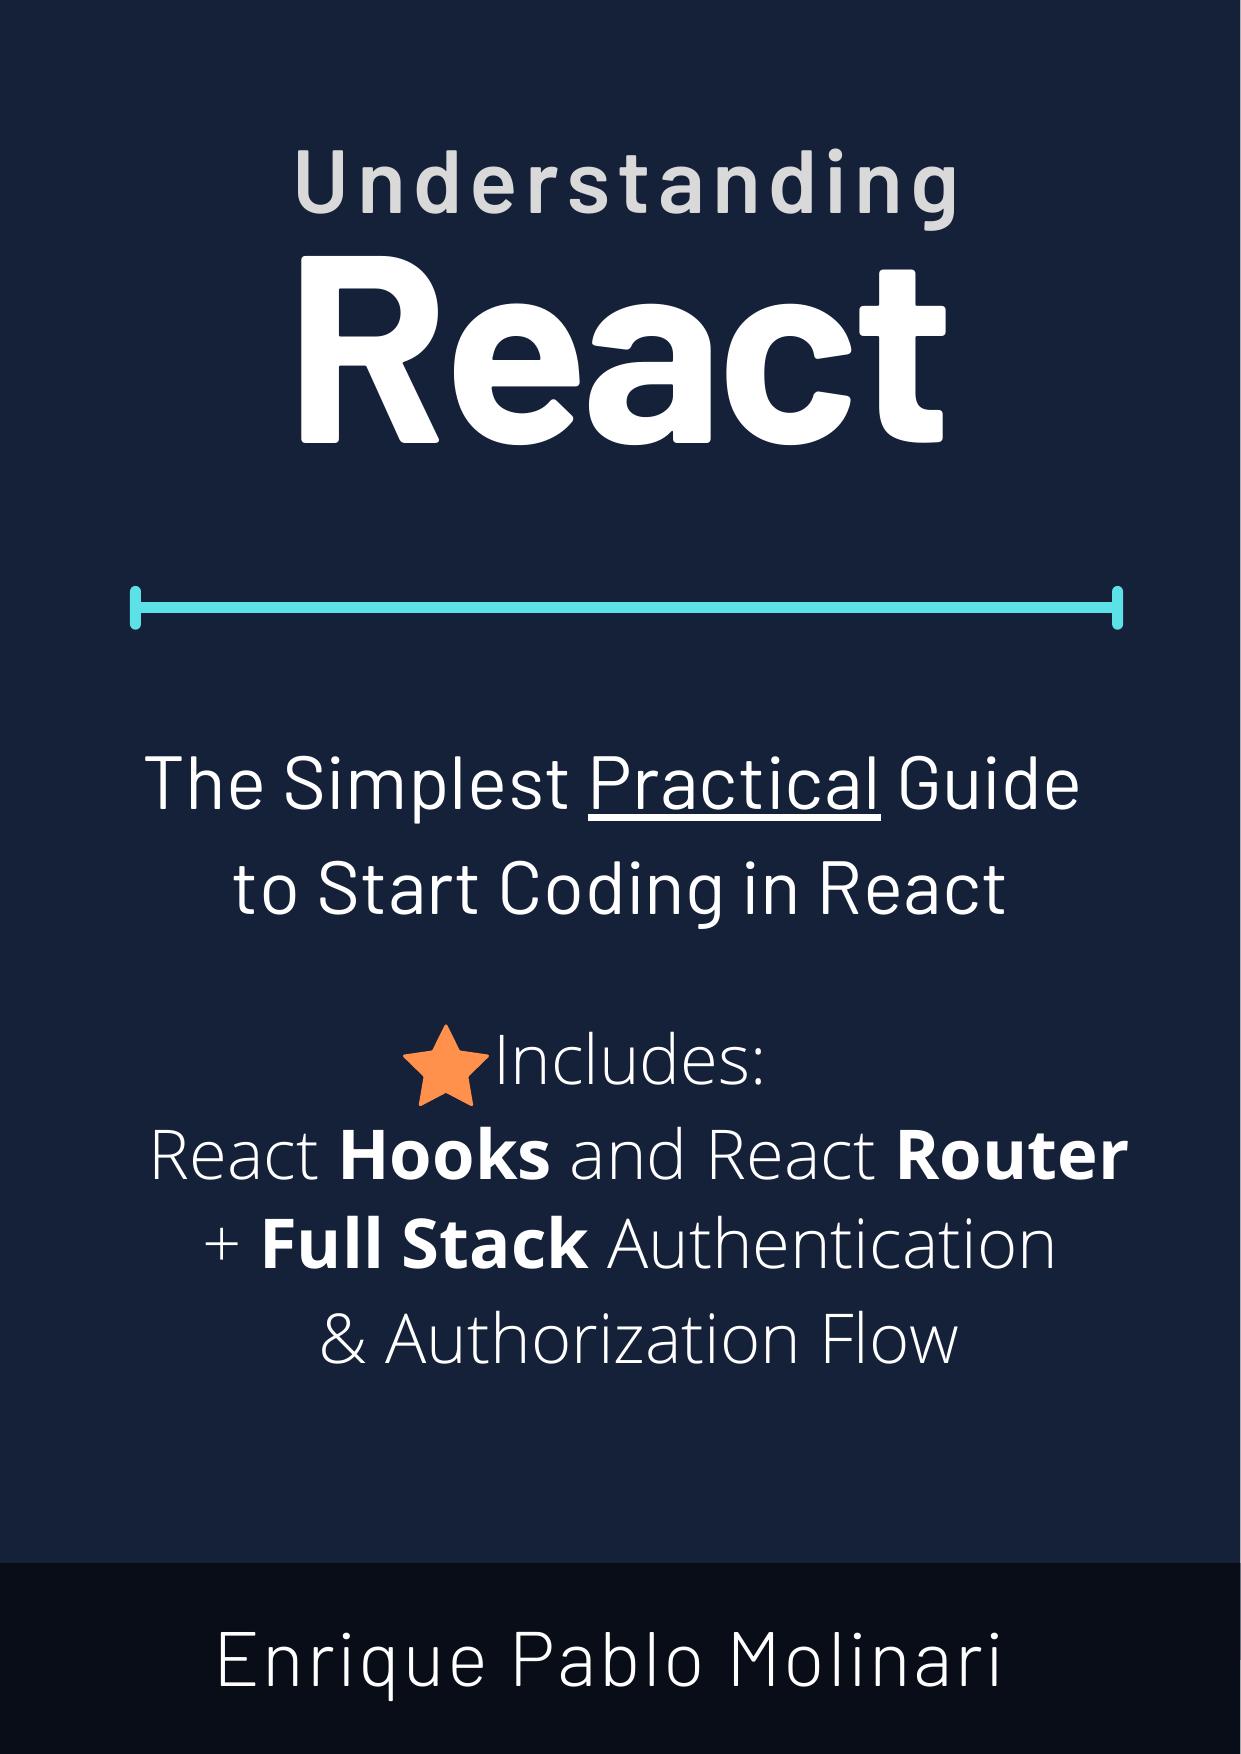 Understanding React The Simplest Practical Guide to Start Coding in React